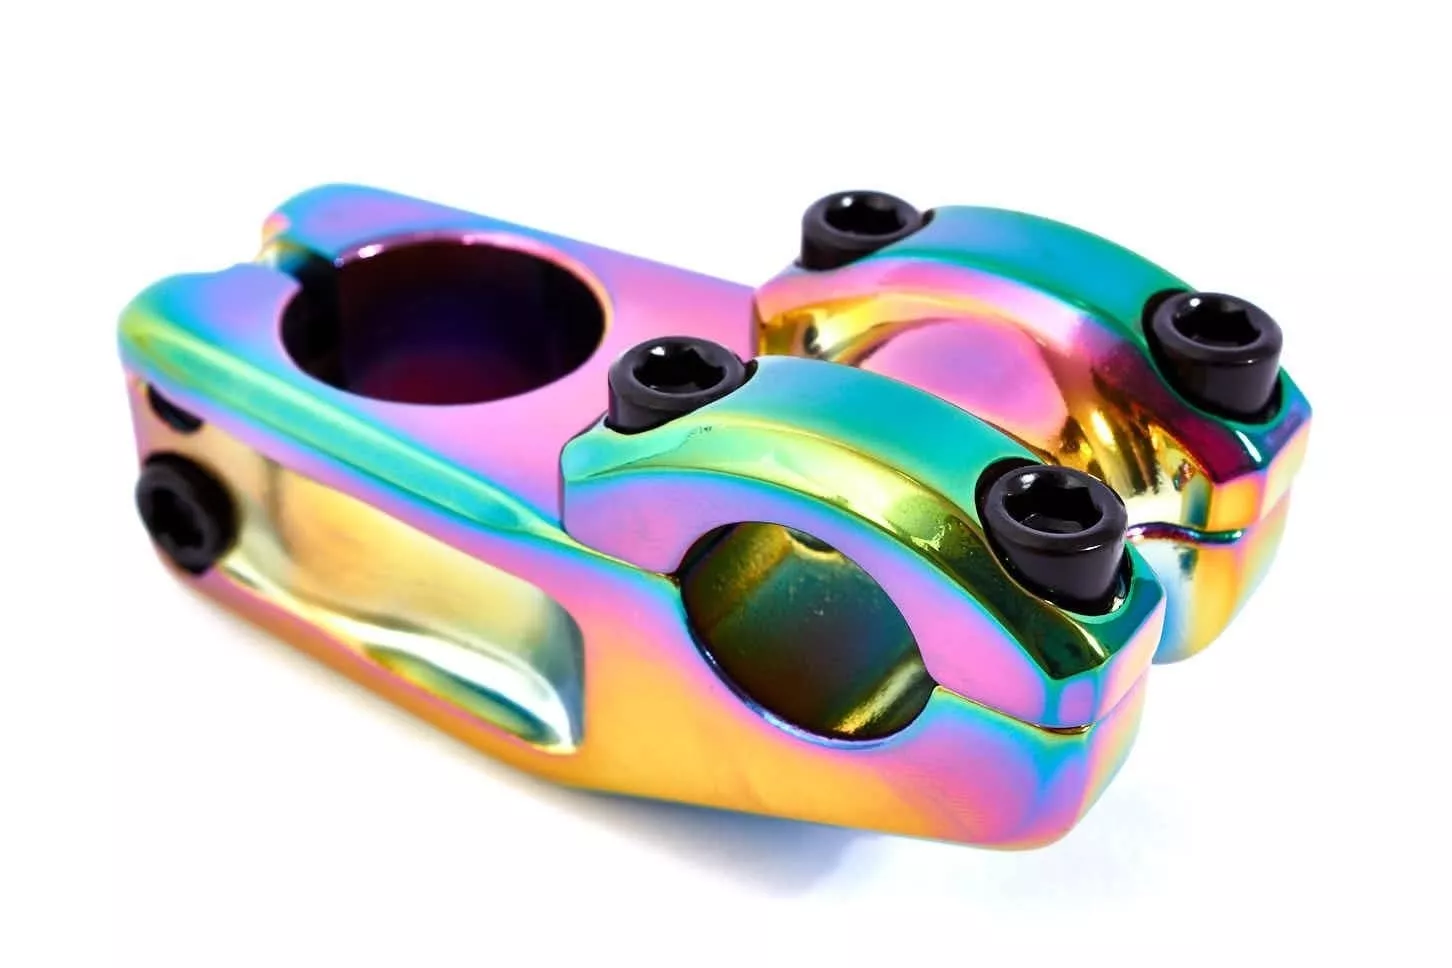 Buy Oil Slick BMX parts cheap and easy online